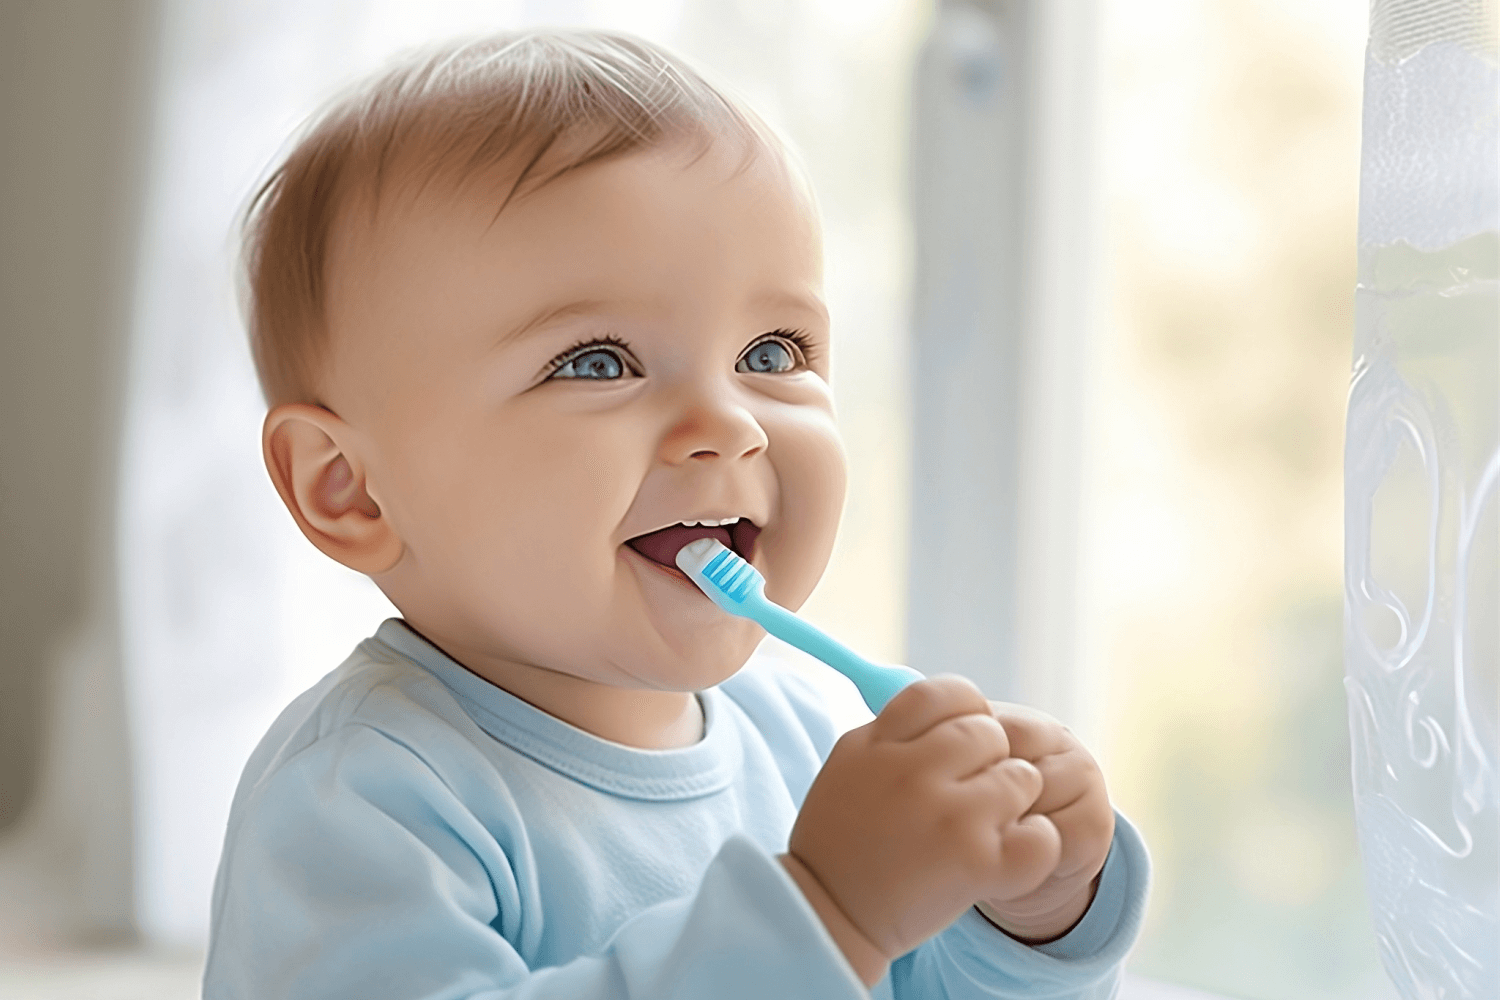 A Baby With A Toothbrush In Their Mouth, Showing How To Start Dental Care Early